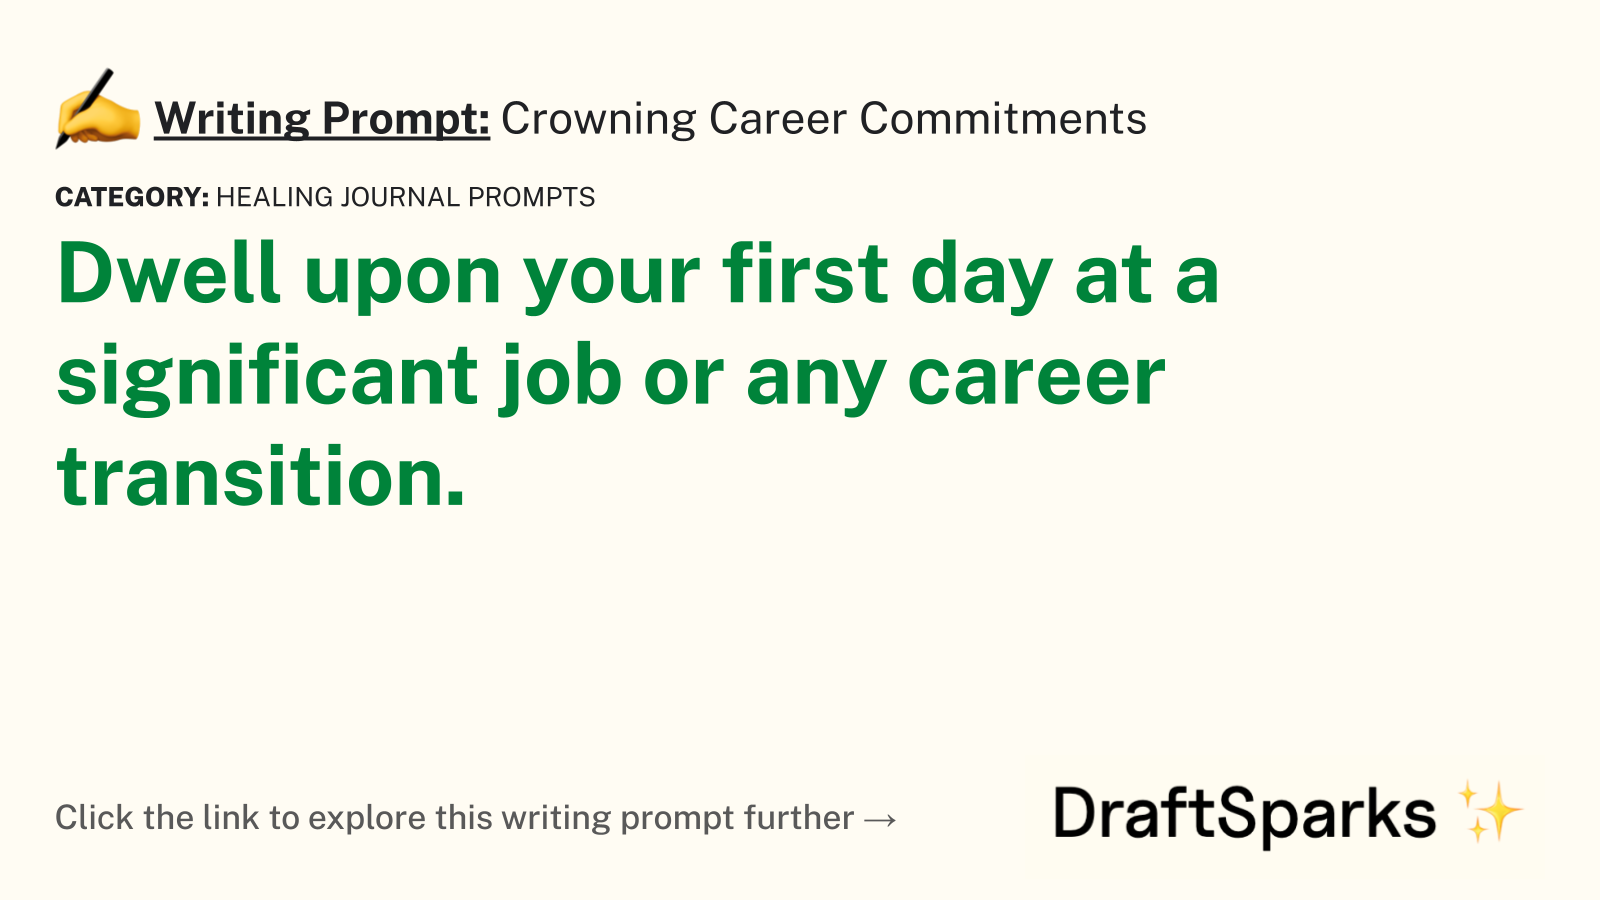 Crowning Career Commitments